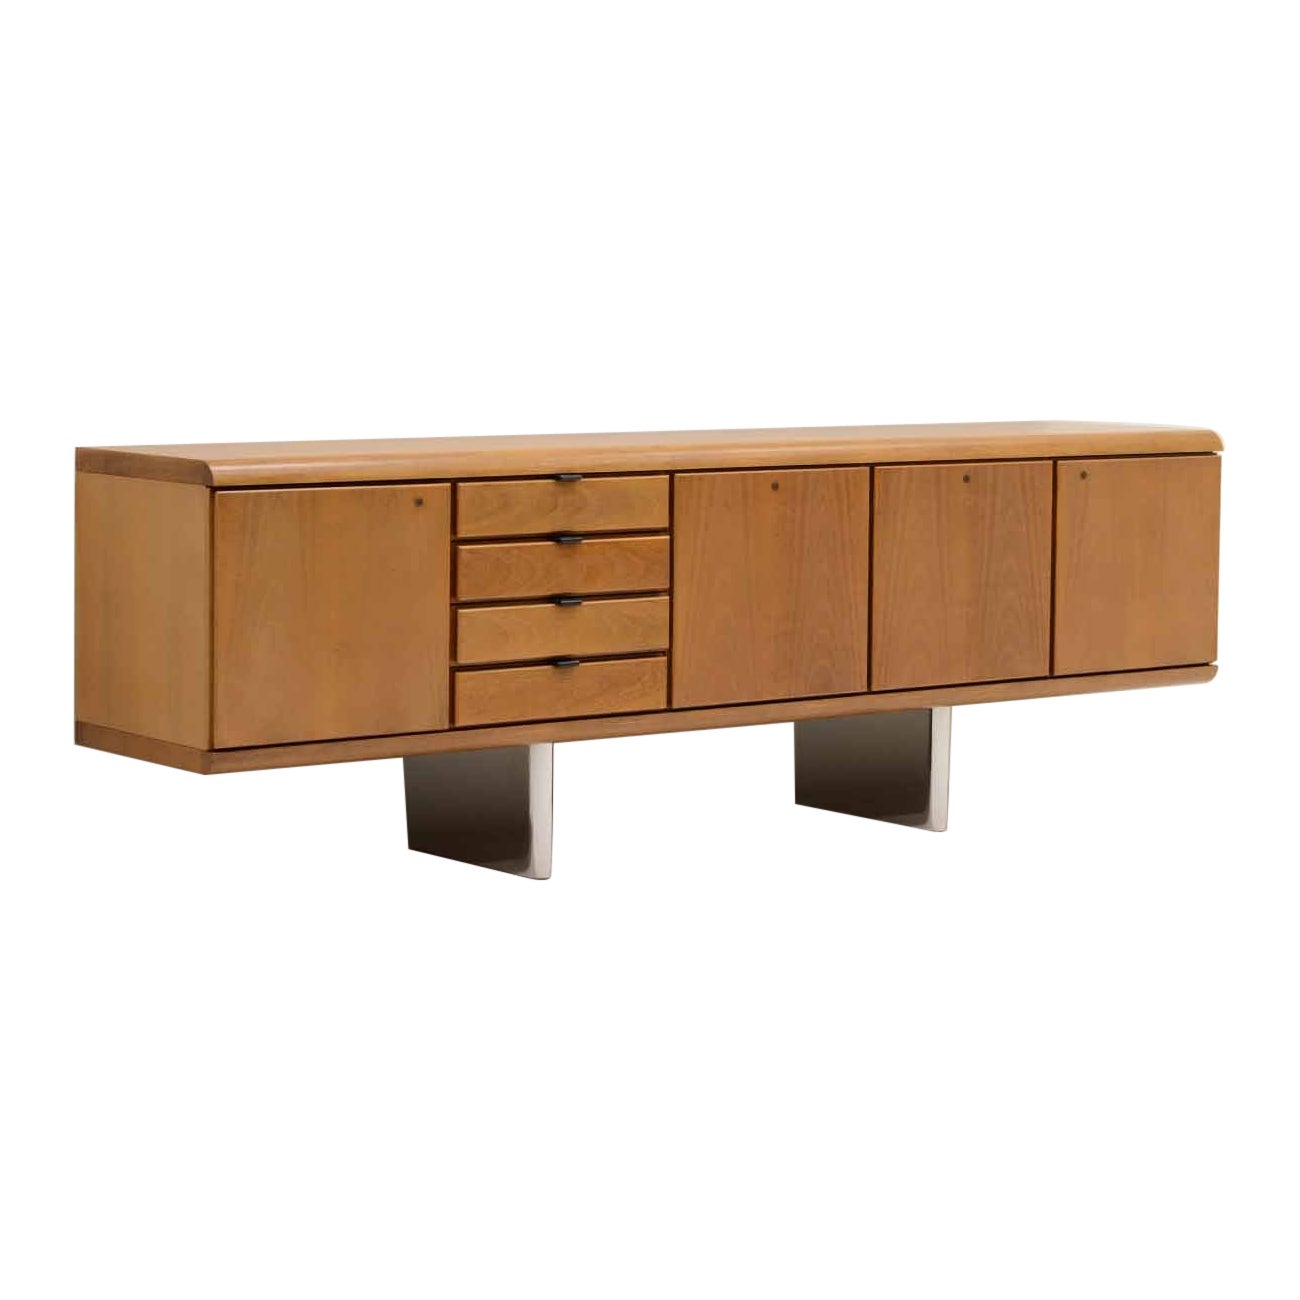 Large Mahogany Sideboard by Hans Von Klier for Skipper, Italy, 1970s For Sale